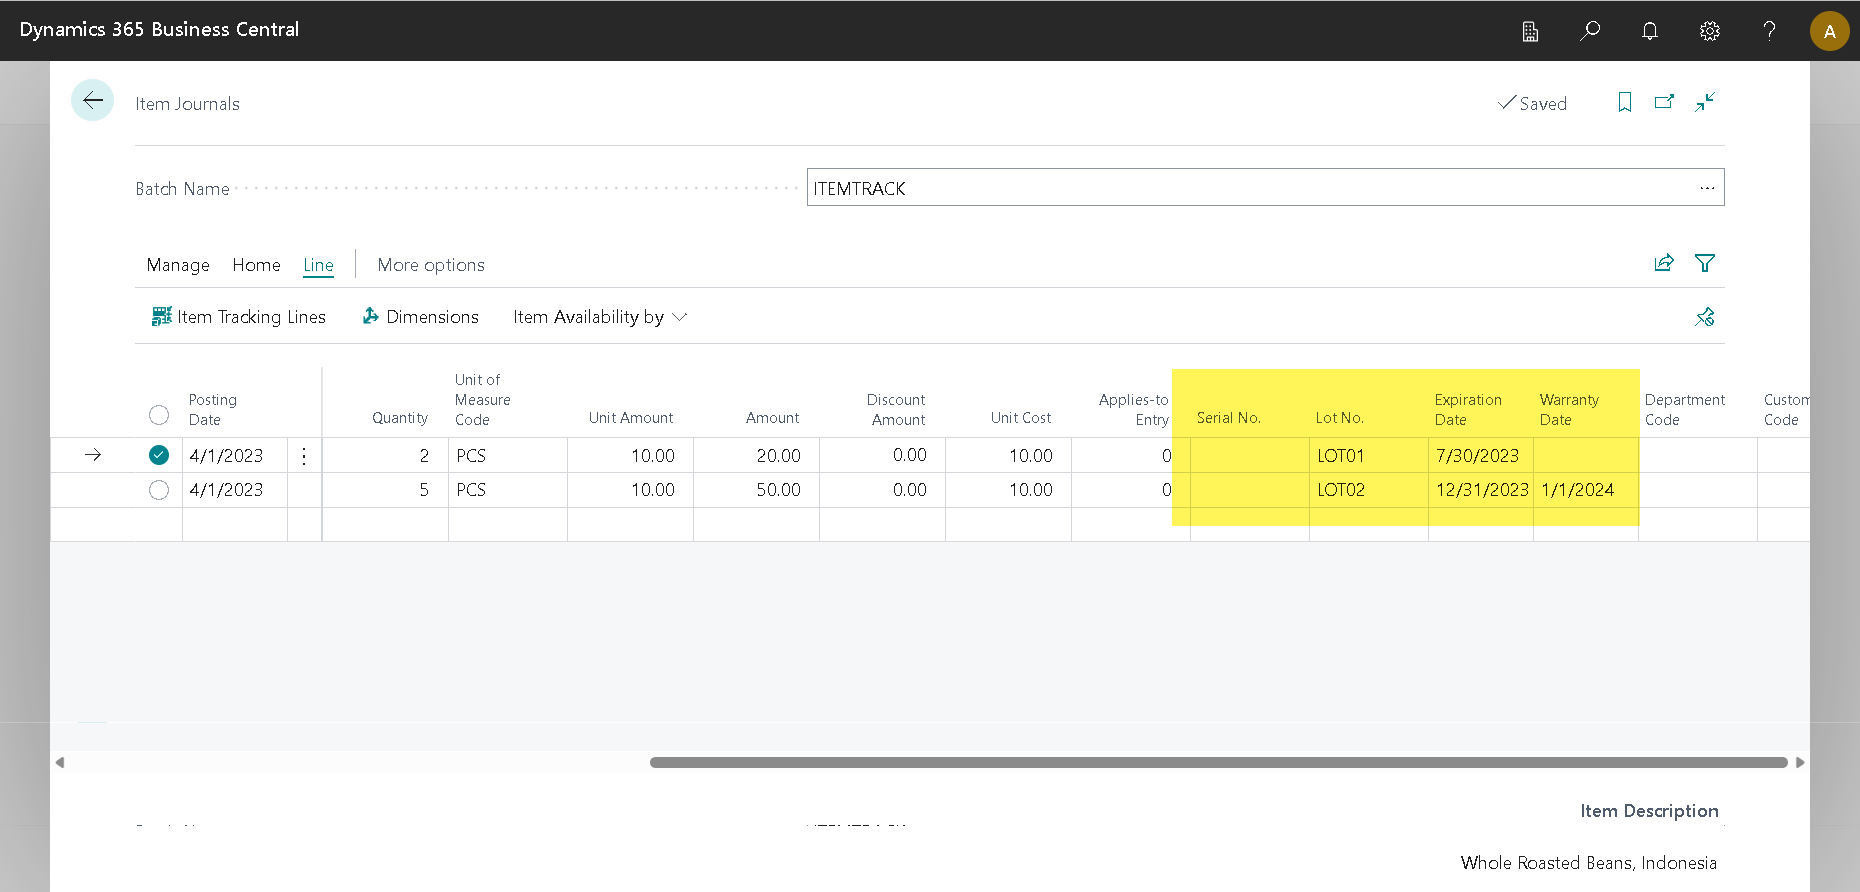 New Feature to “Add Item tracking lines from Item Journal lines” on Microsoft Dynamics Business Central (aka from v22.0)